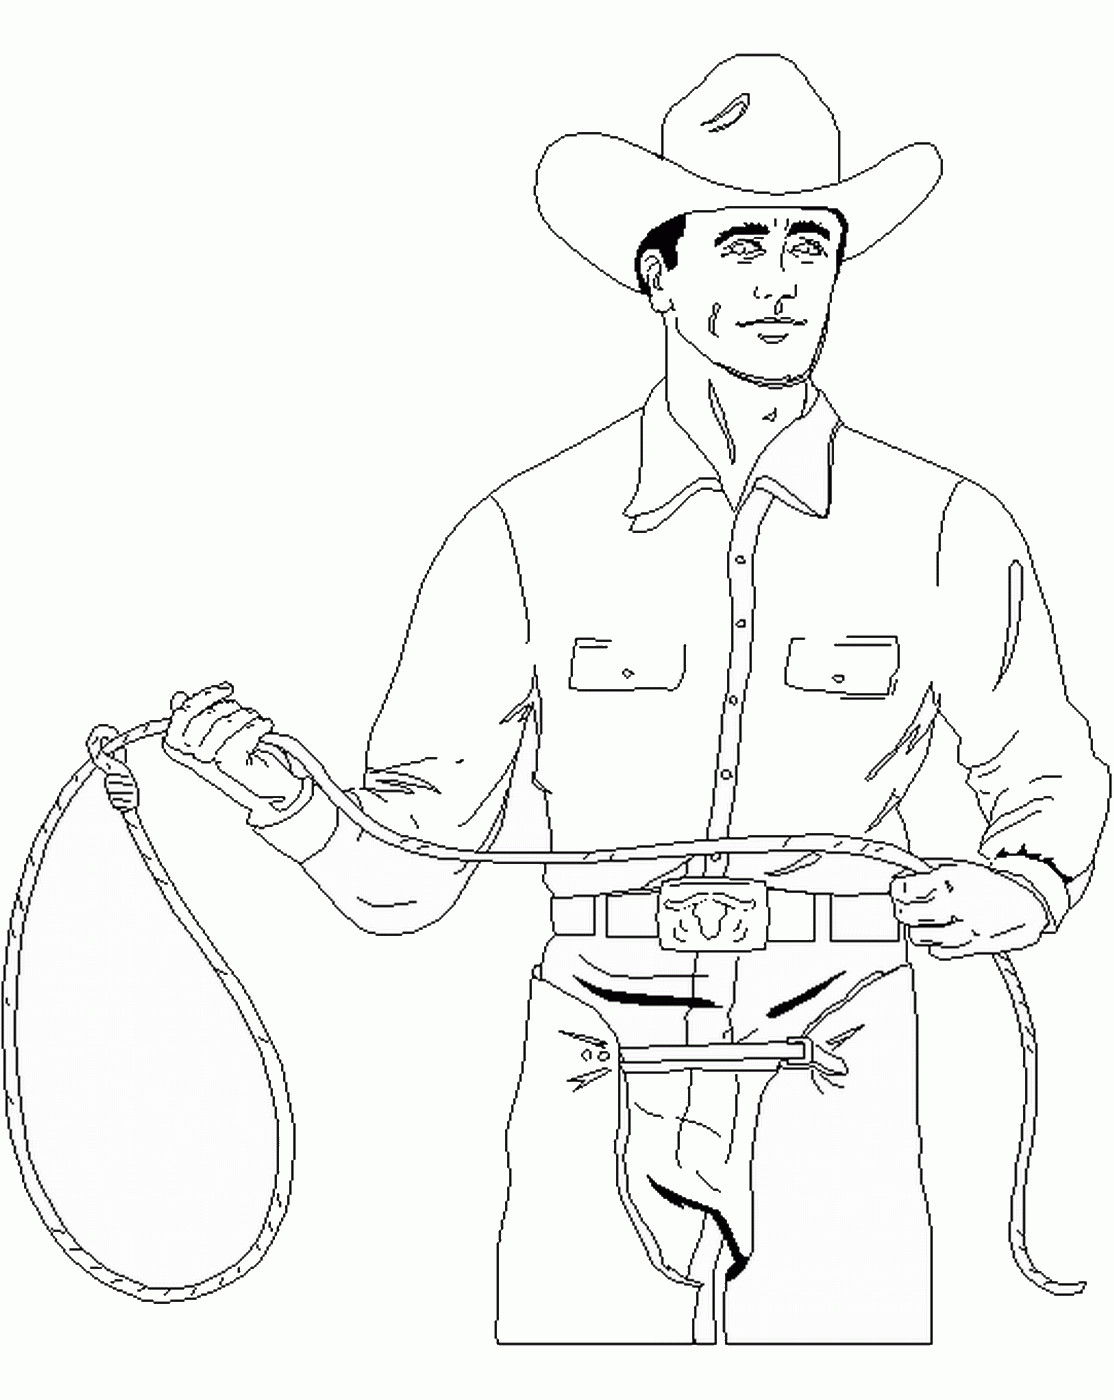 Printable Cowboy Coloring Pages
 Cowboy Coloring Pages